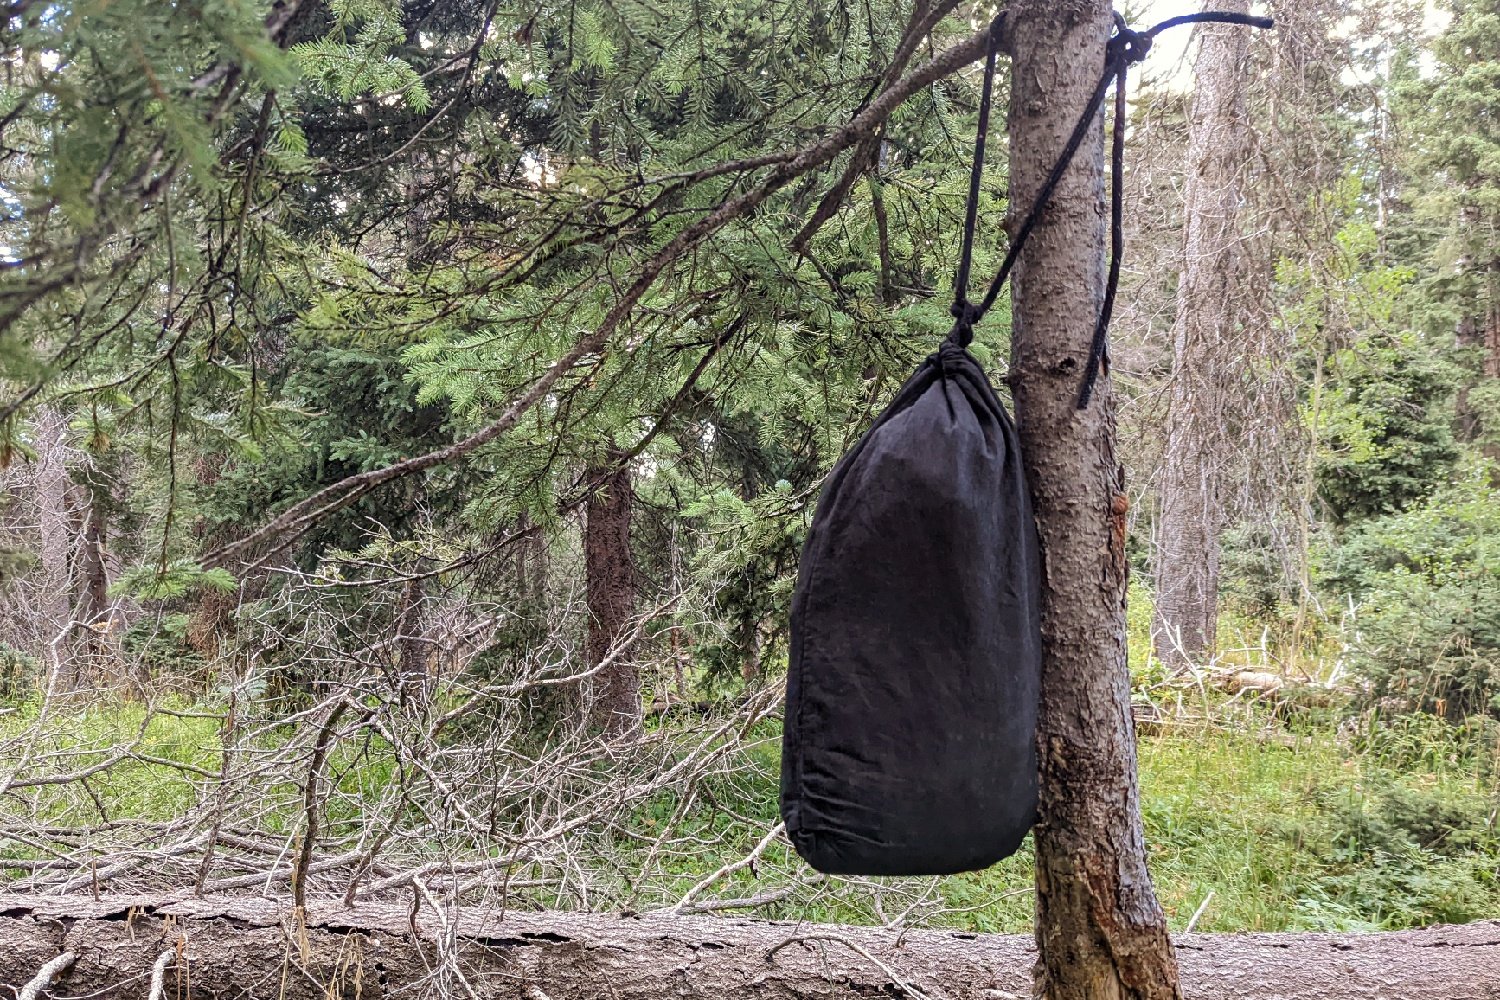 An Ursack tied to a tree